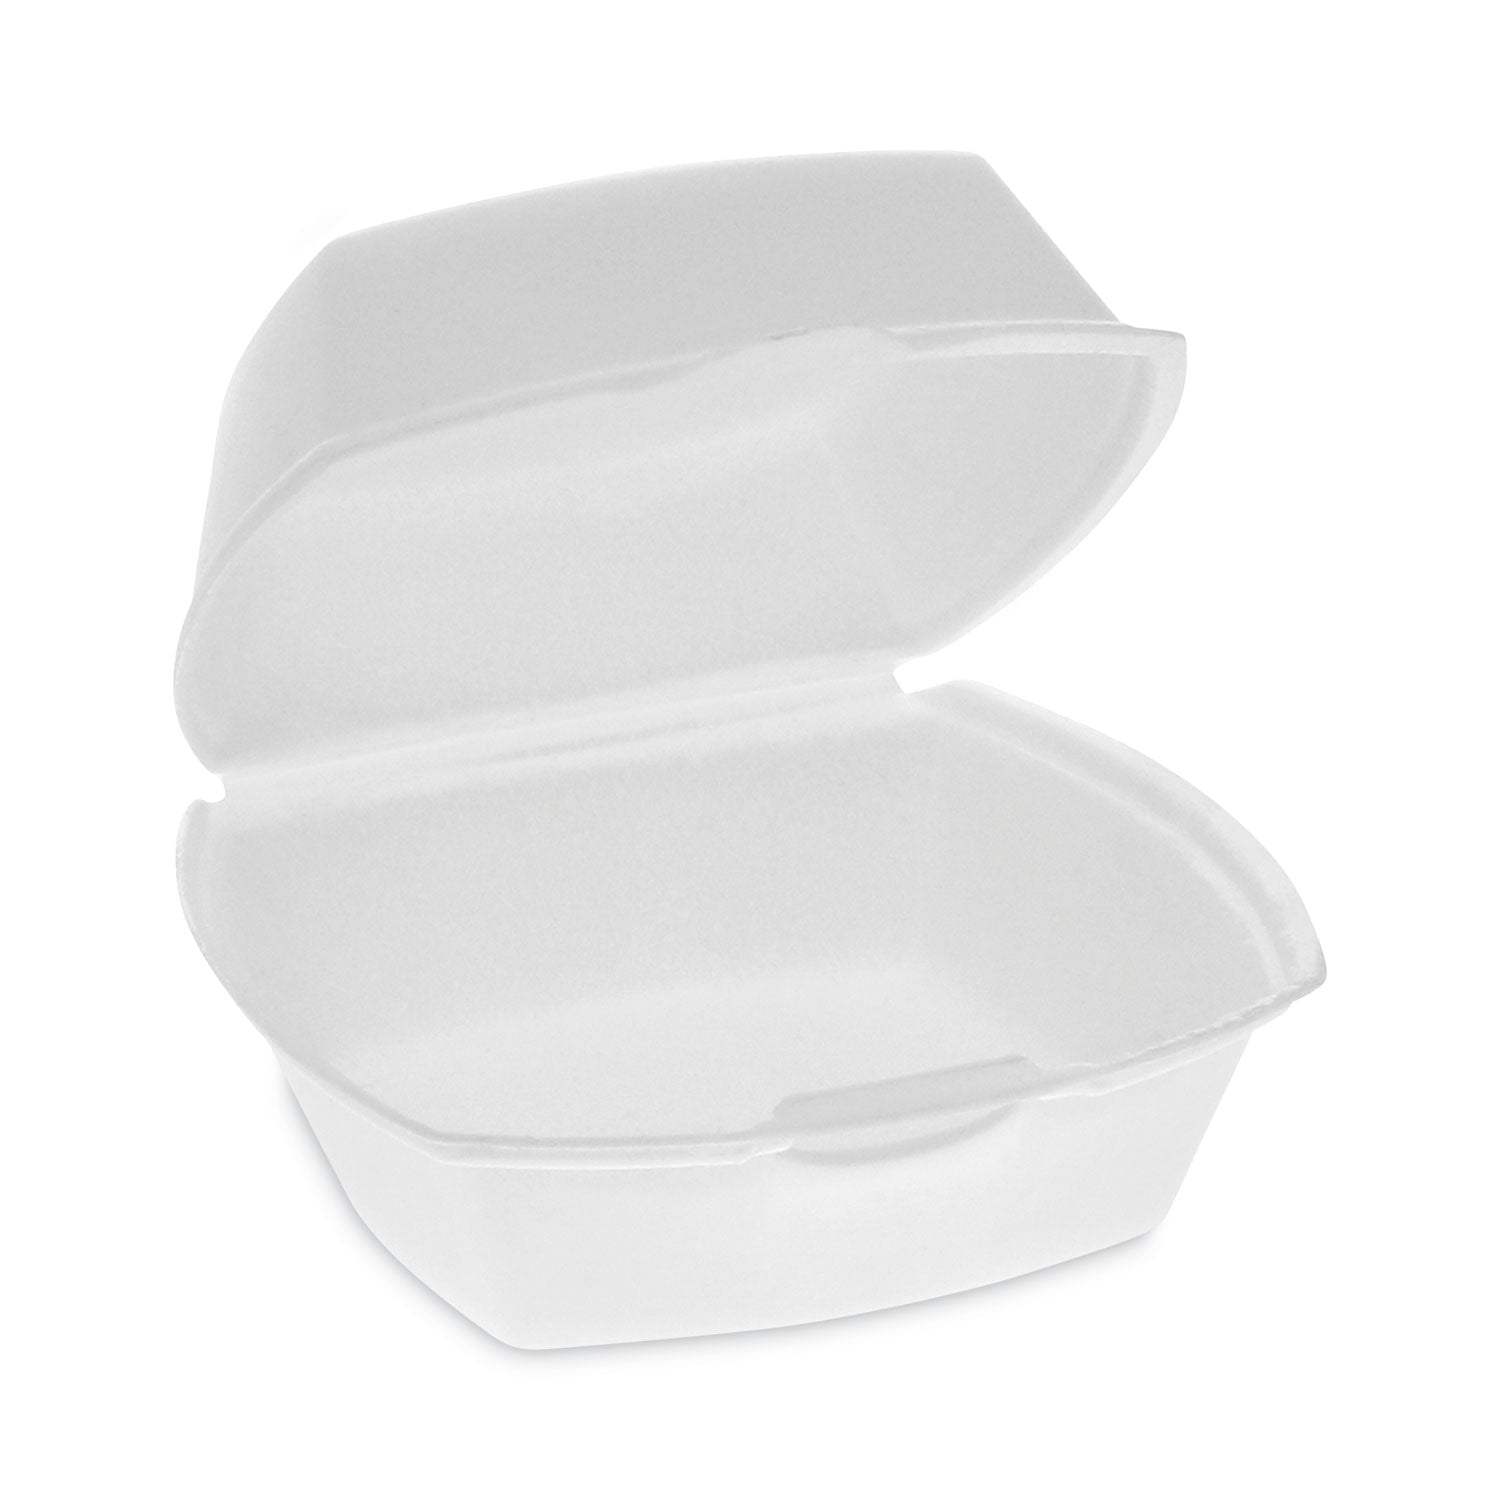 foam-hinged-lid-container-single-tab-lock-513-x-513-x-25-white-500-carton_pctyth100790000 - 1